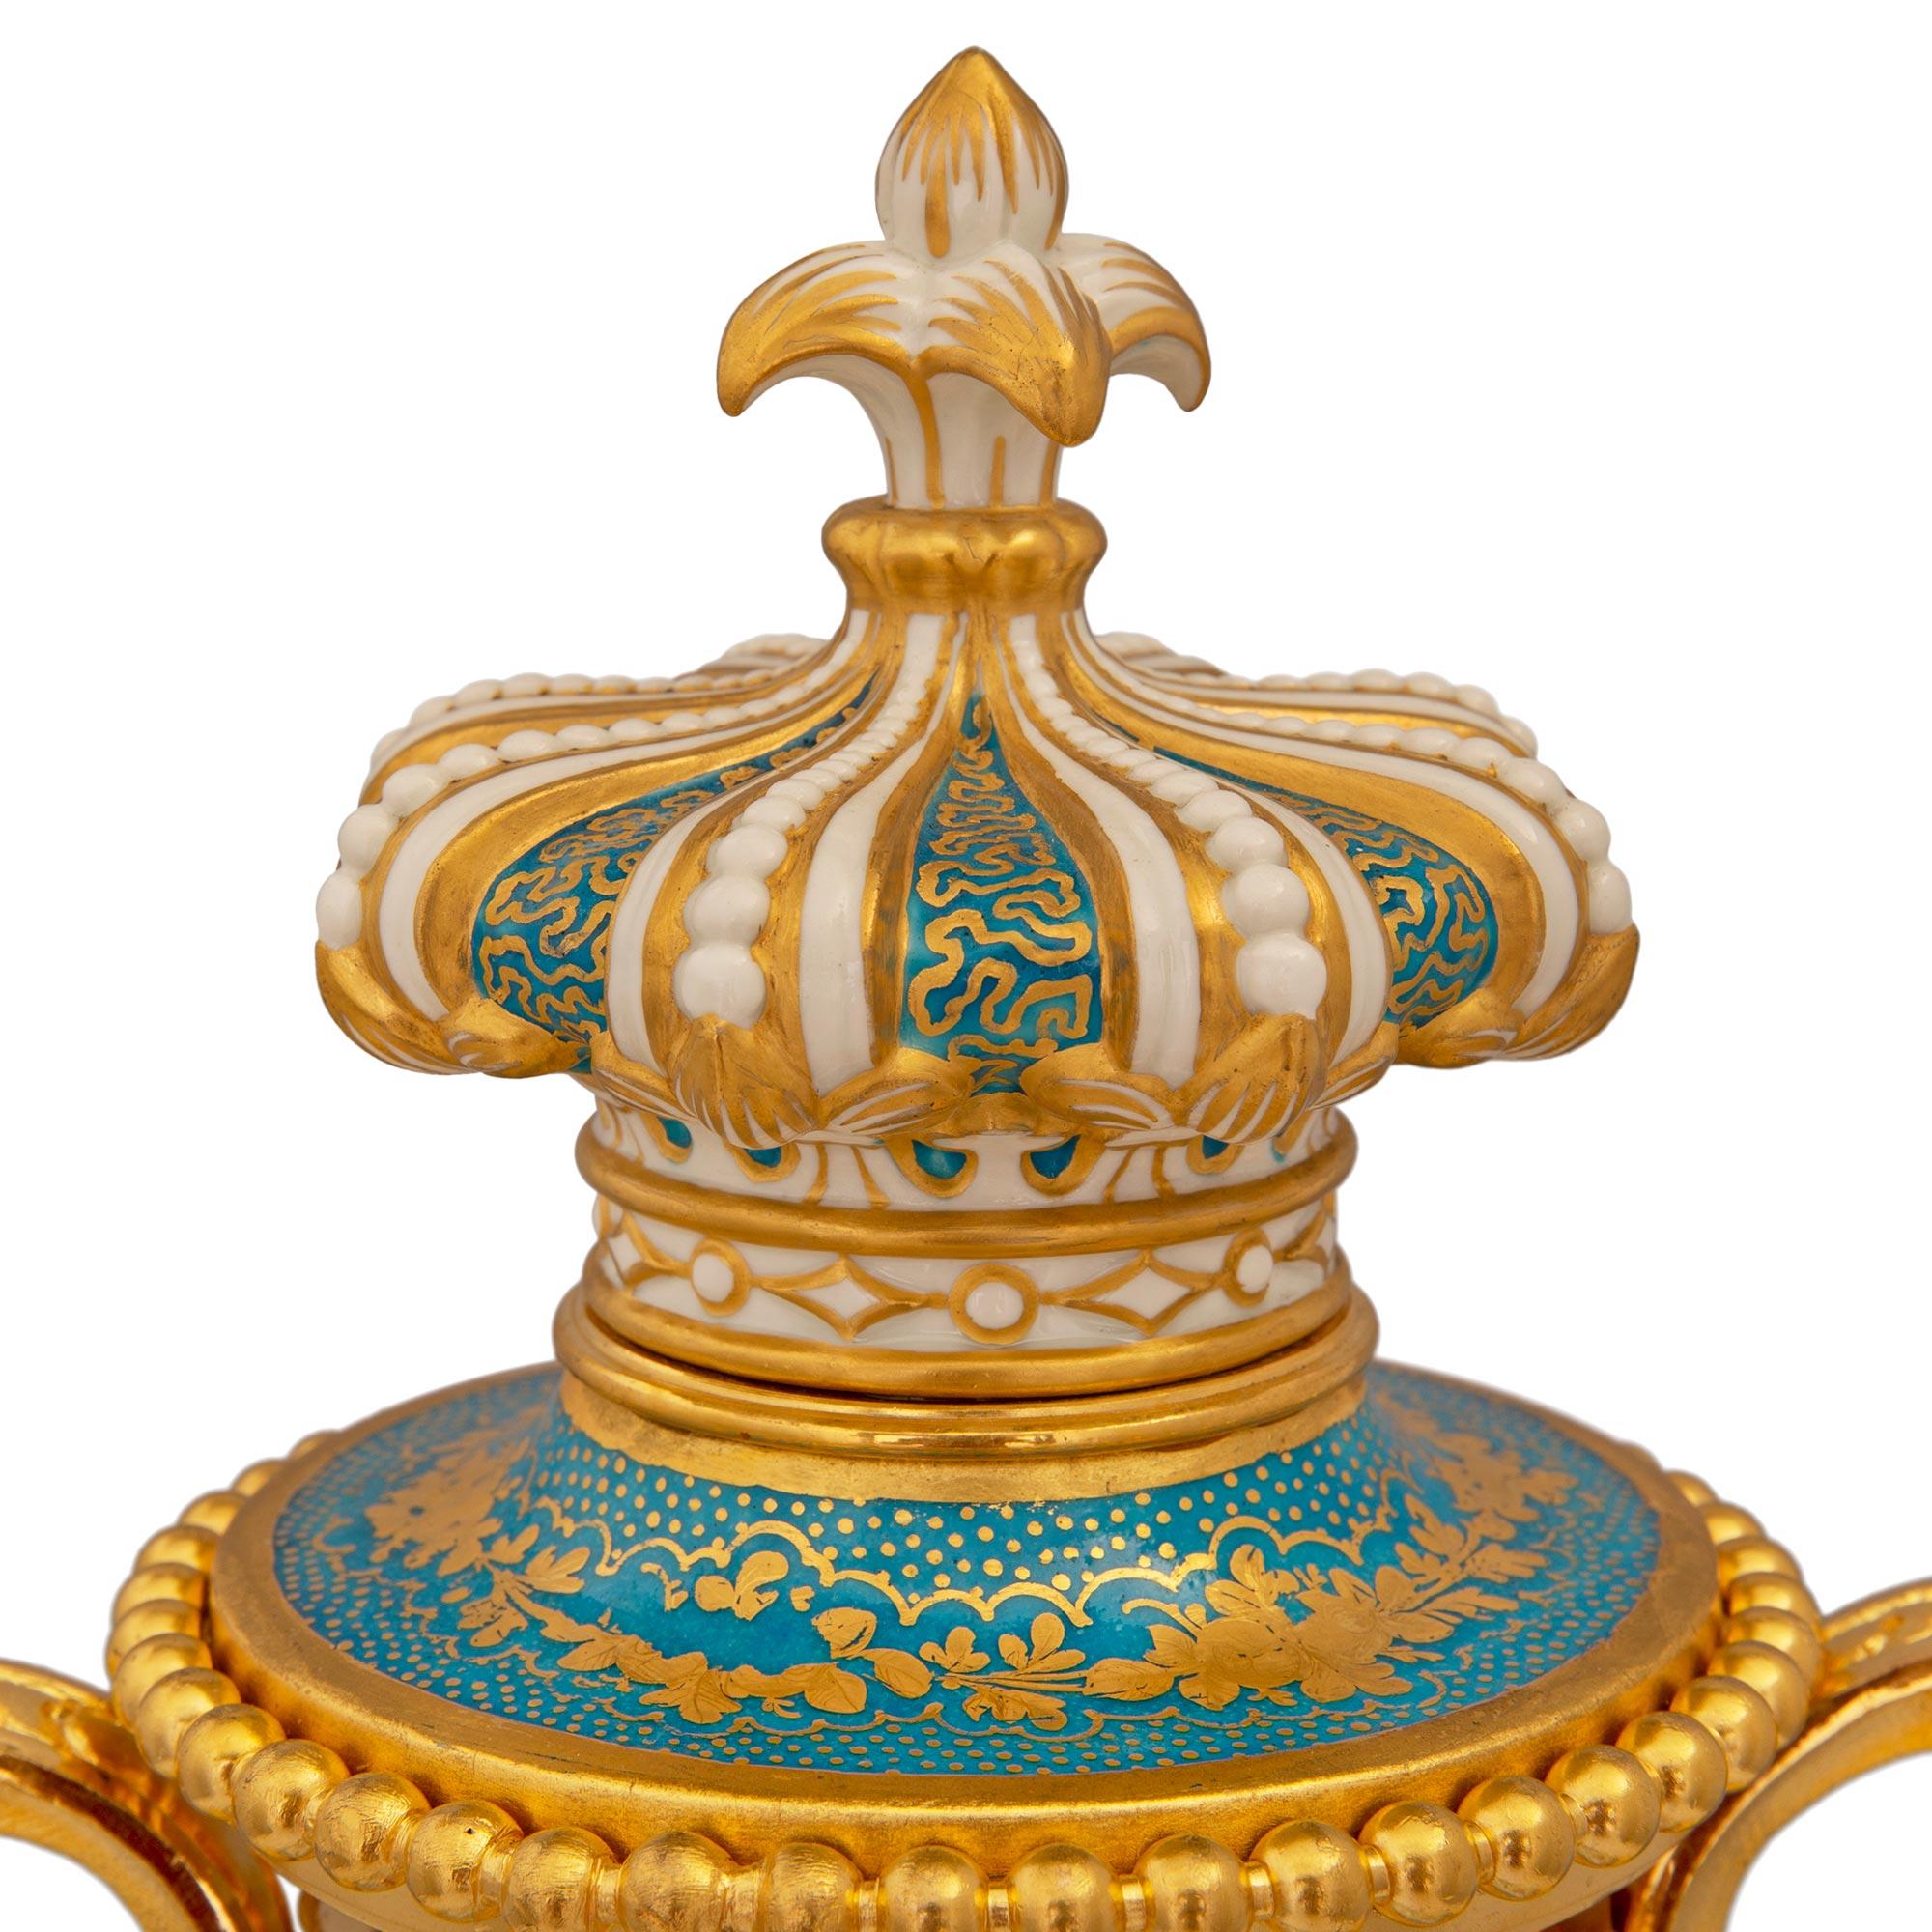 Pair of French 19th Century Louis XVI St. Sèvres Porcelain & Ormolu Lidded Urns For Sale 2